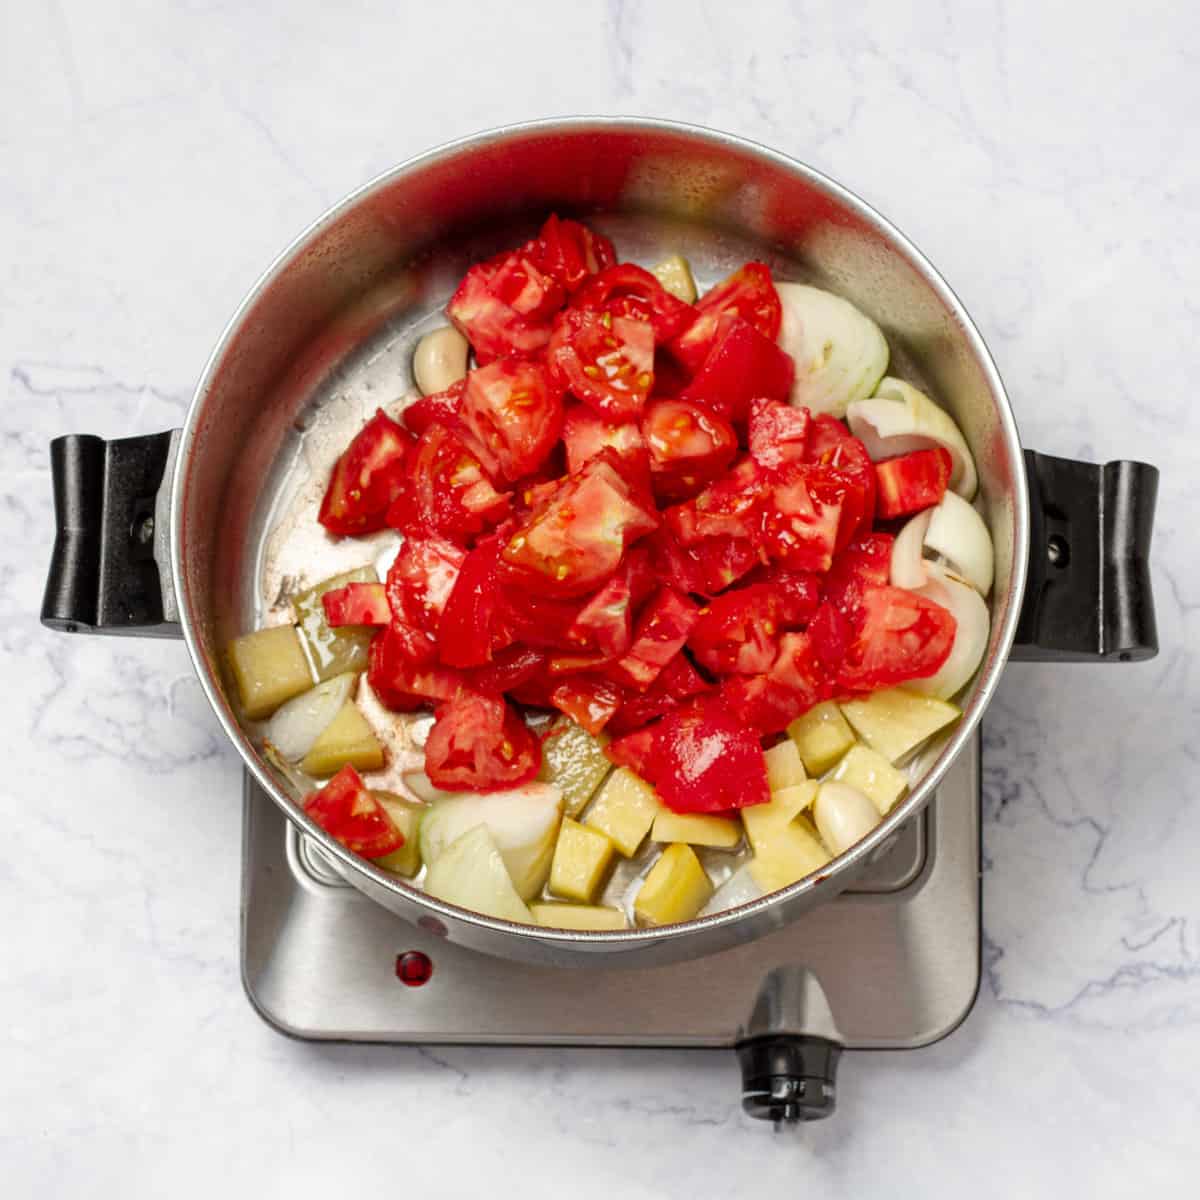 diced tomatoes and peeled potato added to cooked Onion and Garlic in sauce pan